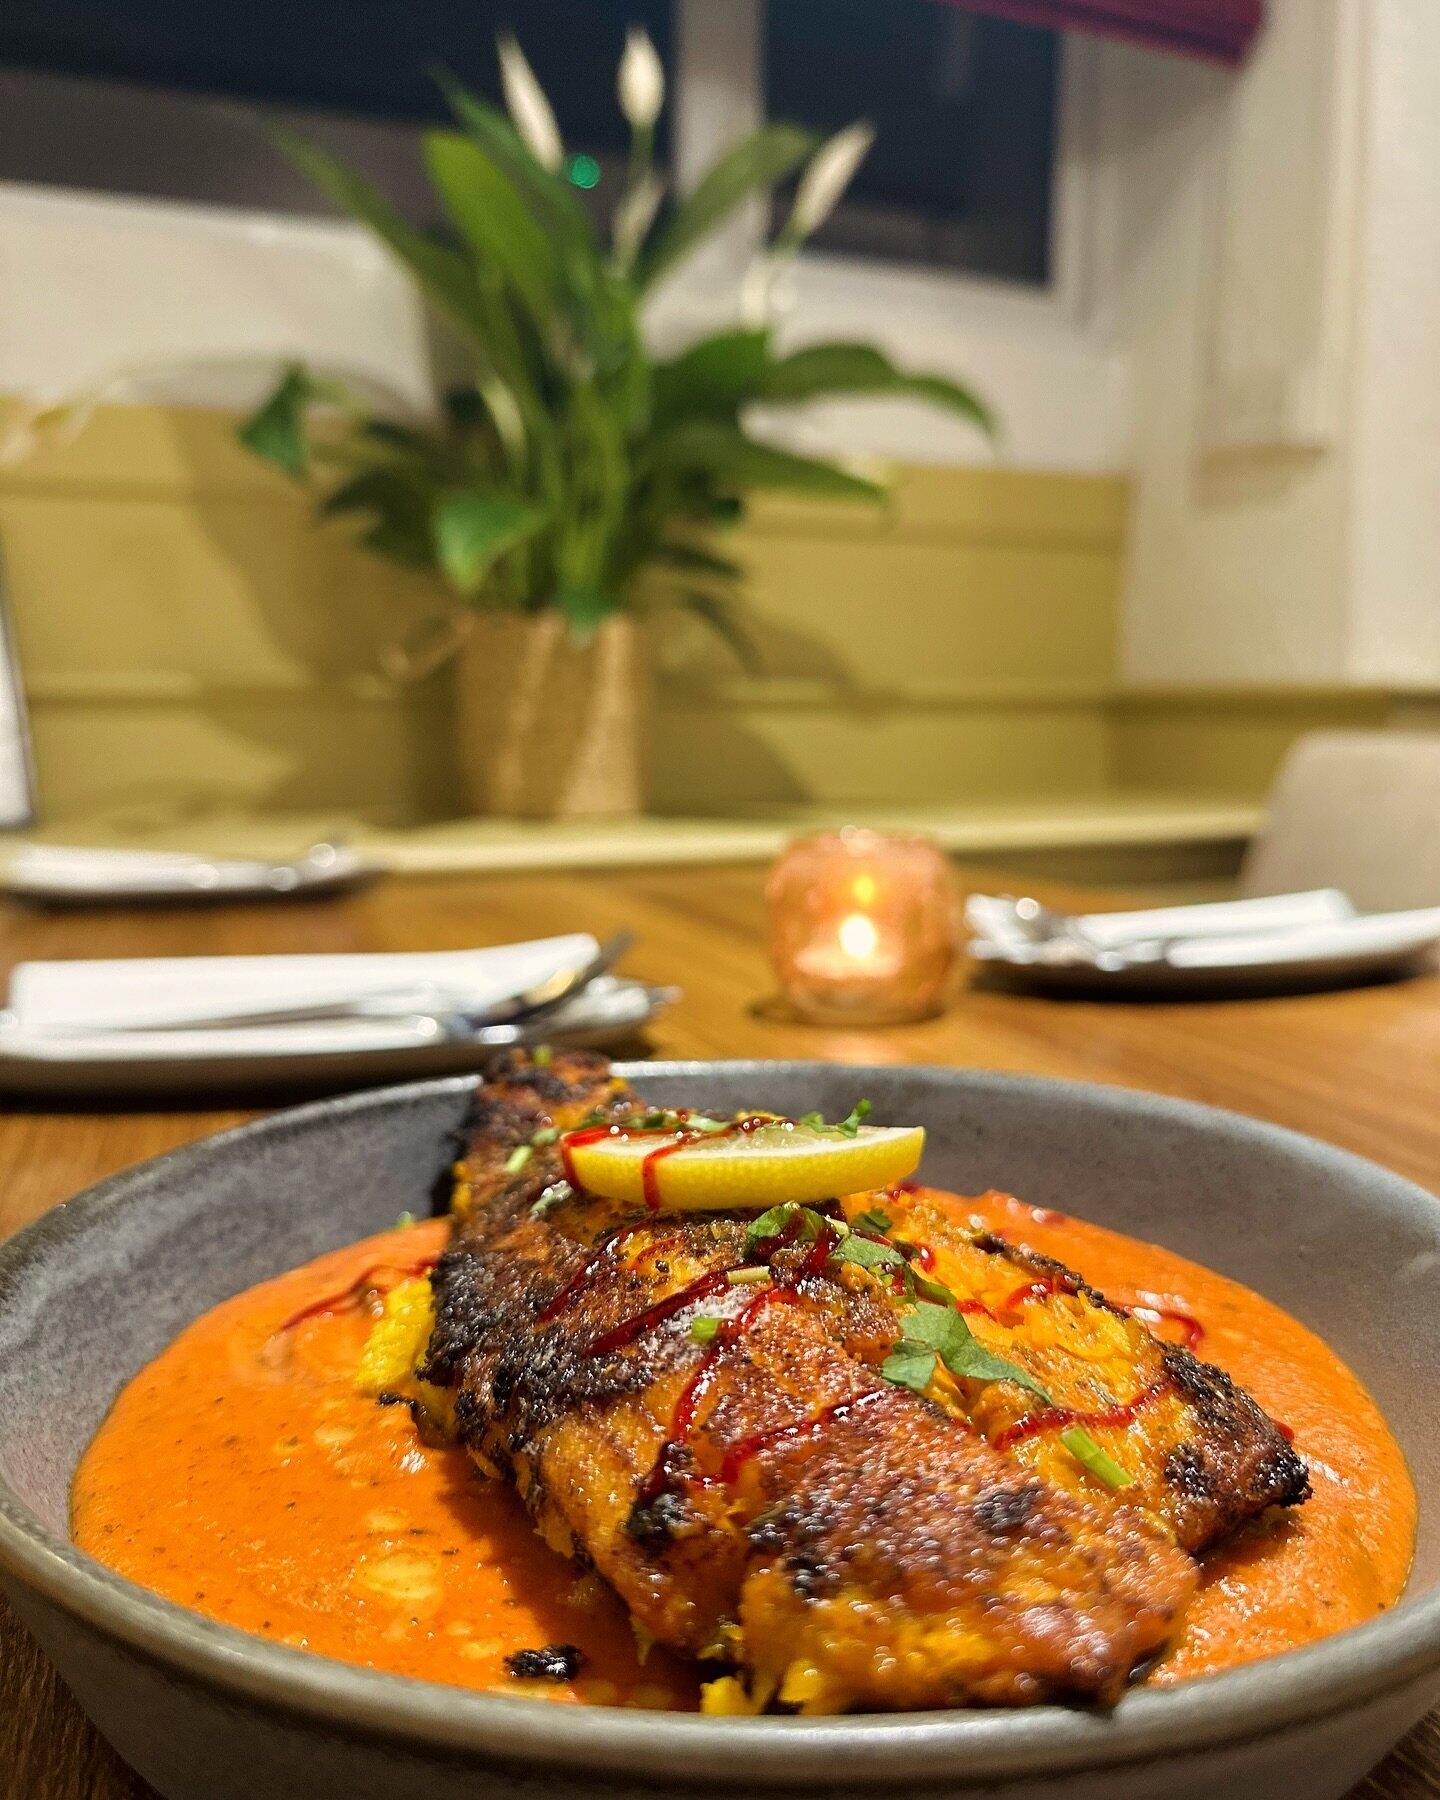 🌊🐟 Sea bass special 🌿🍋🍴

Indulge in the flavors of our sea bass fillet marinated with dill and lemon grass, pan-fried to perfection with a squeeze of tangy lemon juice and a touch of butter presented on a bed of tomato coconut sauce 🍋🧈🍅
#seab